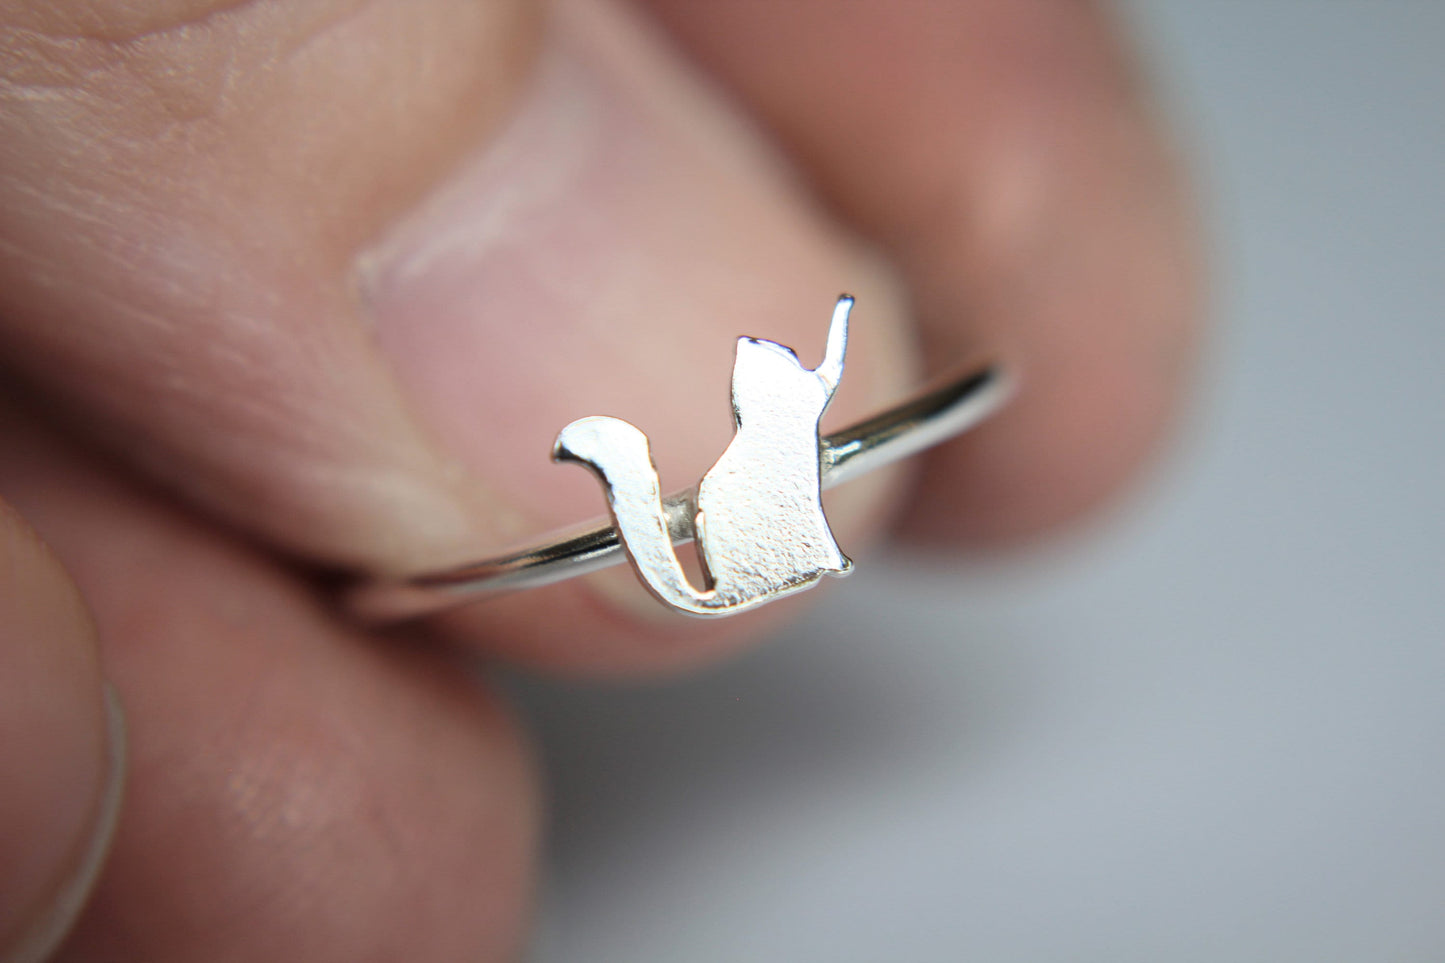 Tiny Cat Ring, Sterling Cat Ring, Cat Lady Ring, Cat Jewelry, Cat Ring, Modern Cat Ring, Minimalist Cat Jewelry, Cats,Kitty Ring, Halloween